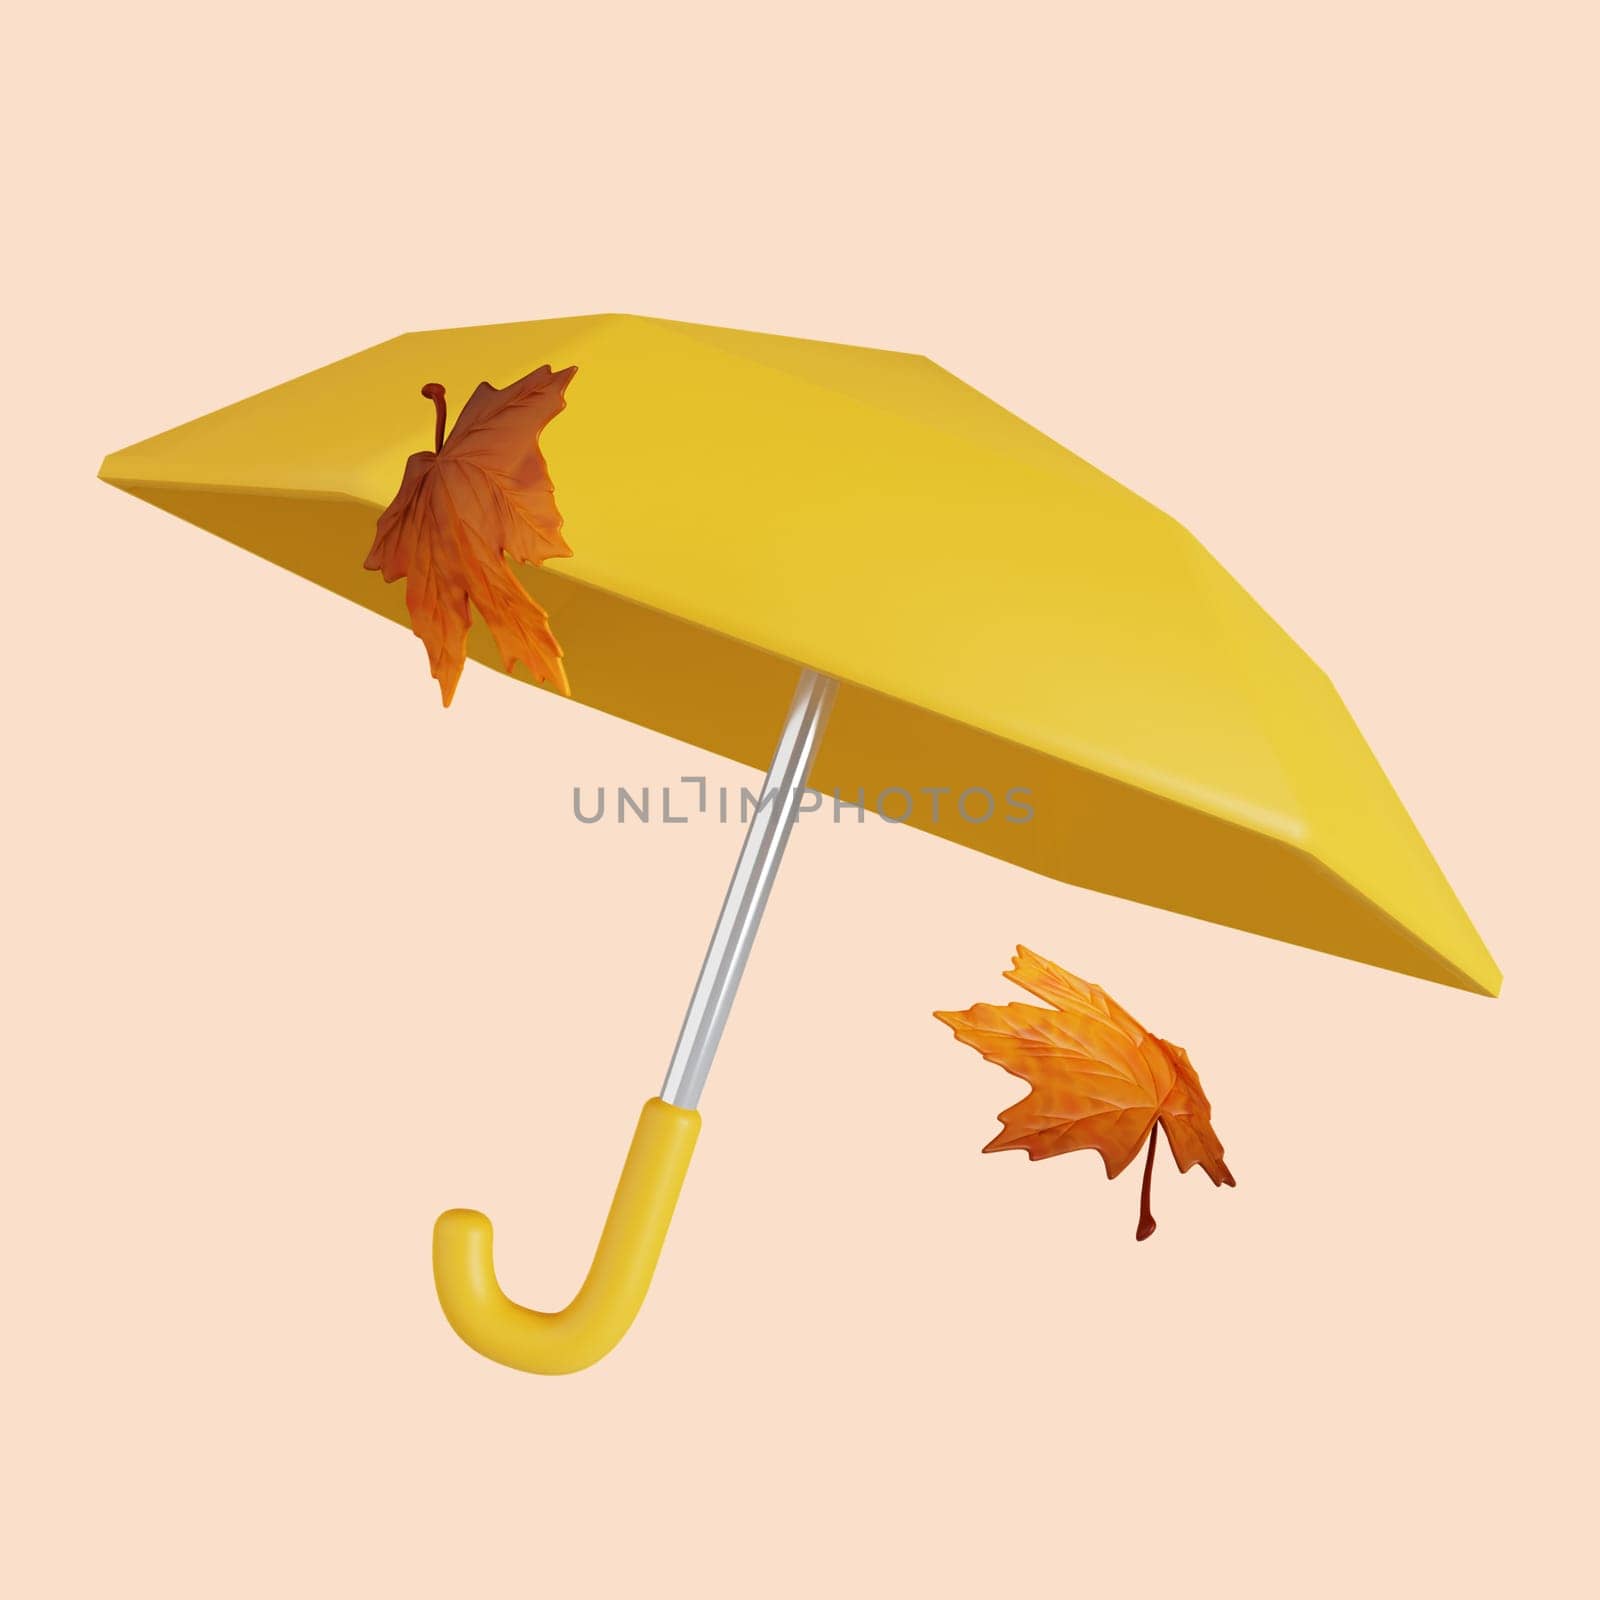 3d Autumn Umbrella with maple leaf. Golden fall. Season decoration. icon isolated on gray background. 3d rendering illustration. Clipping path. by meepiangraphic